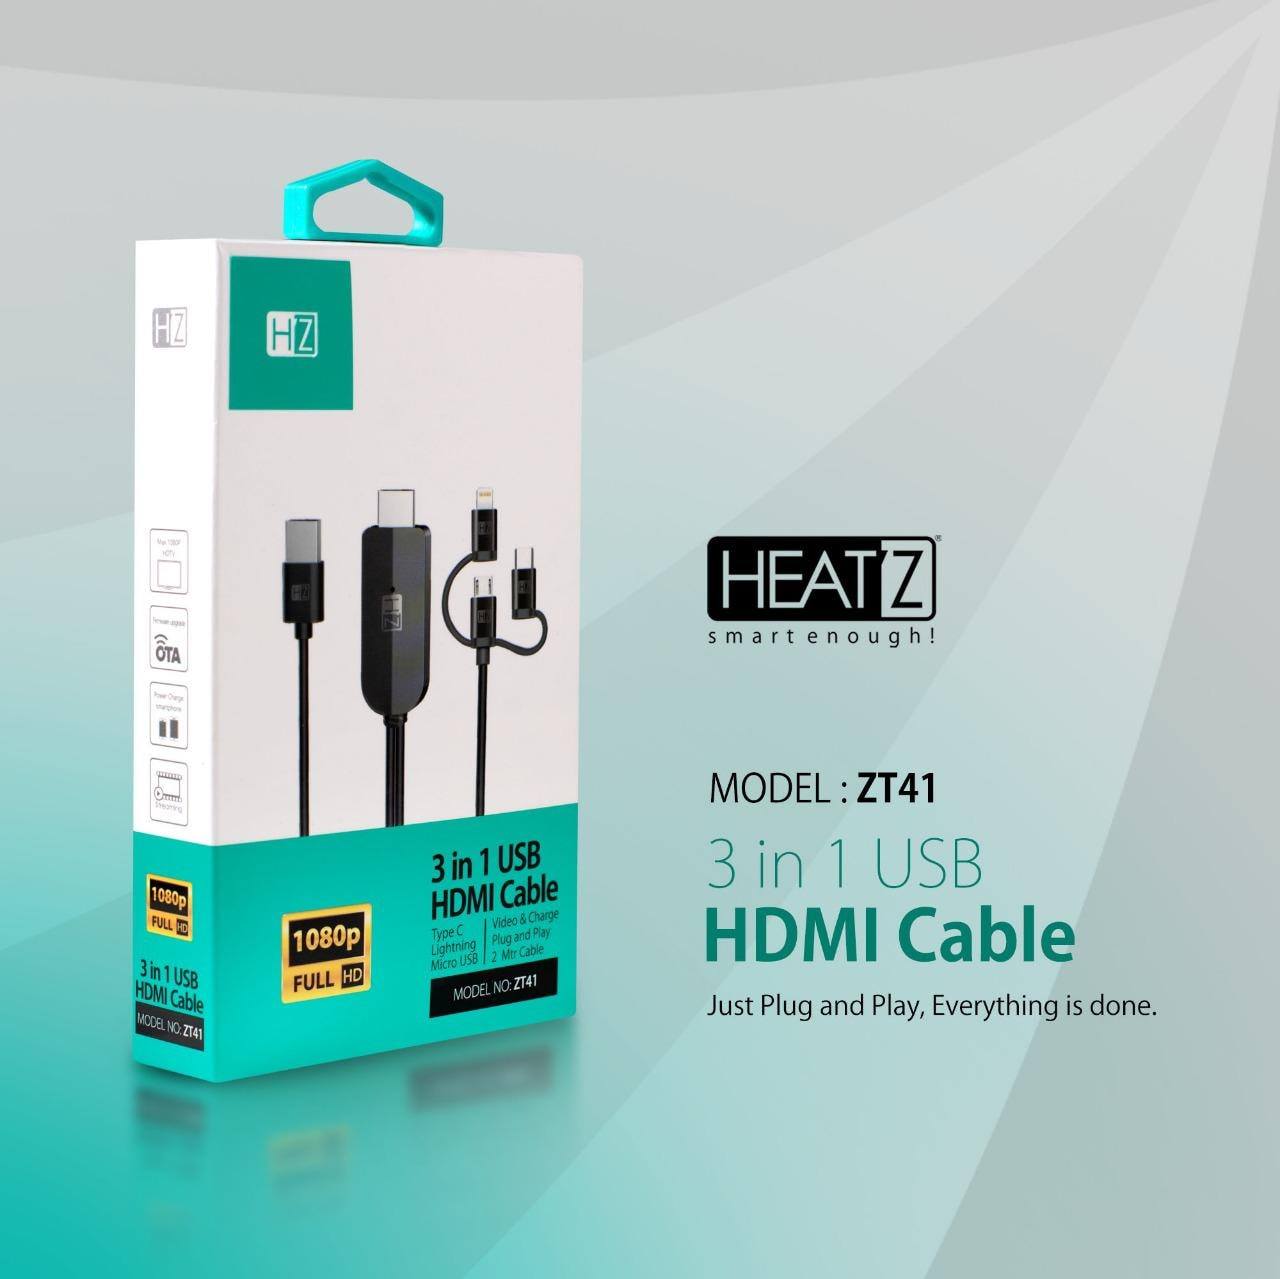 Heatz 3 In 1 Usb Hdmi Cable With 1080 Full Hd ZT41